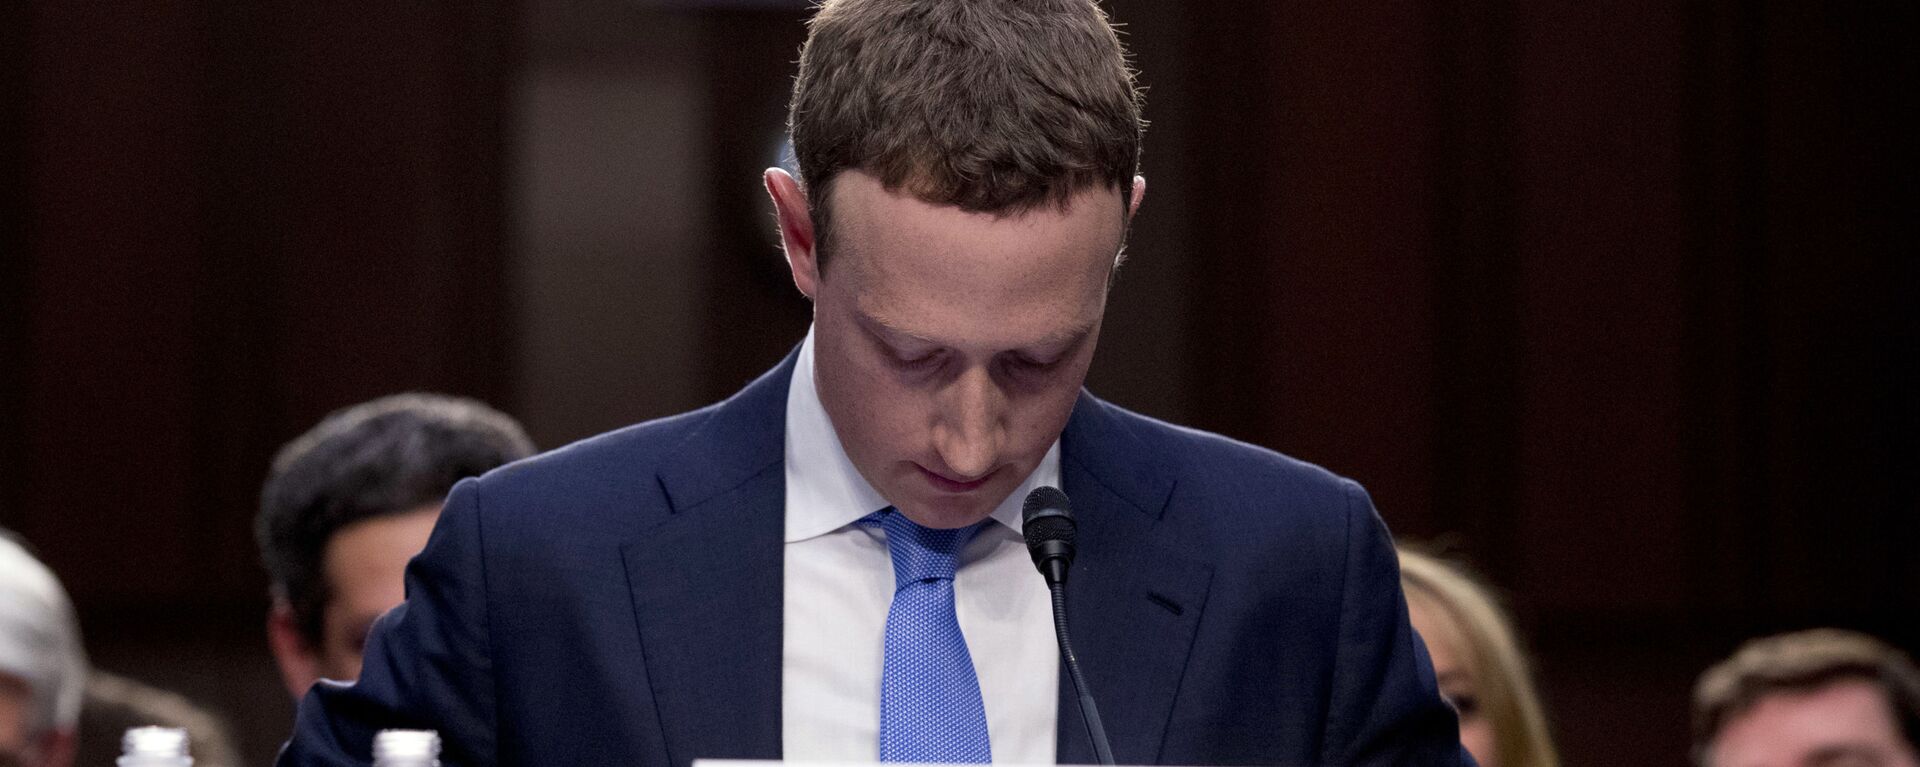 In this April 10, 2018, file photo Facebook CEO Mark Zuckerberg looks down as a break is called during his testimony before a joint hearing of the Commerce and Judiciary Committees on Capitol Hill in Washington. - Sputnik International, 1920, 18.09.2021